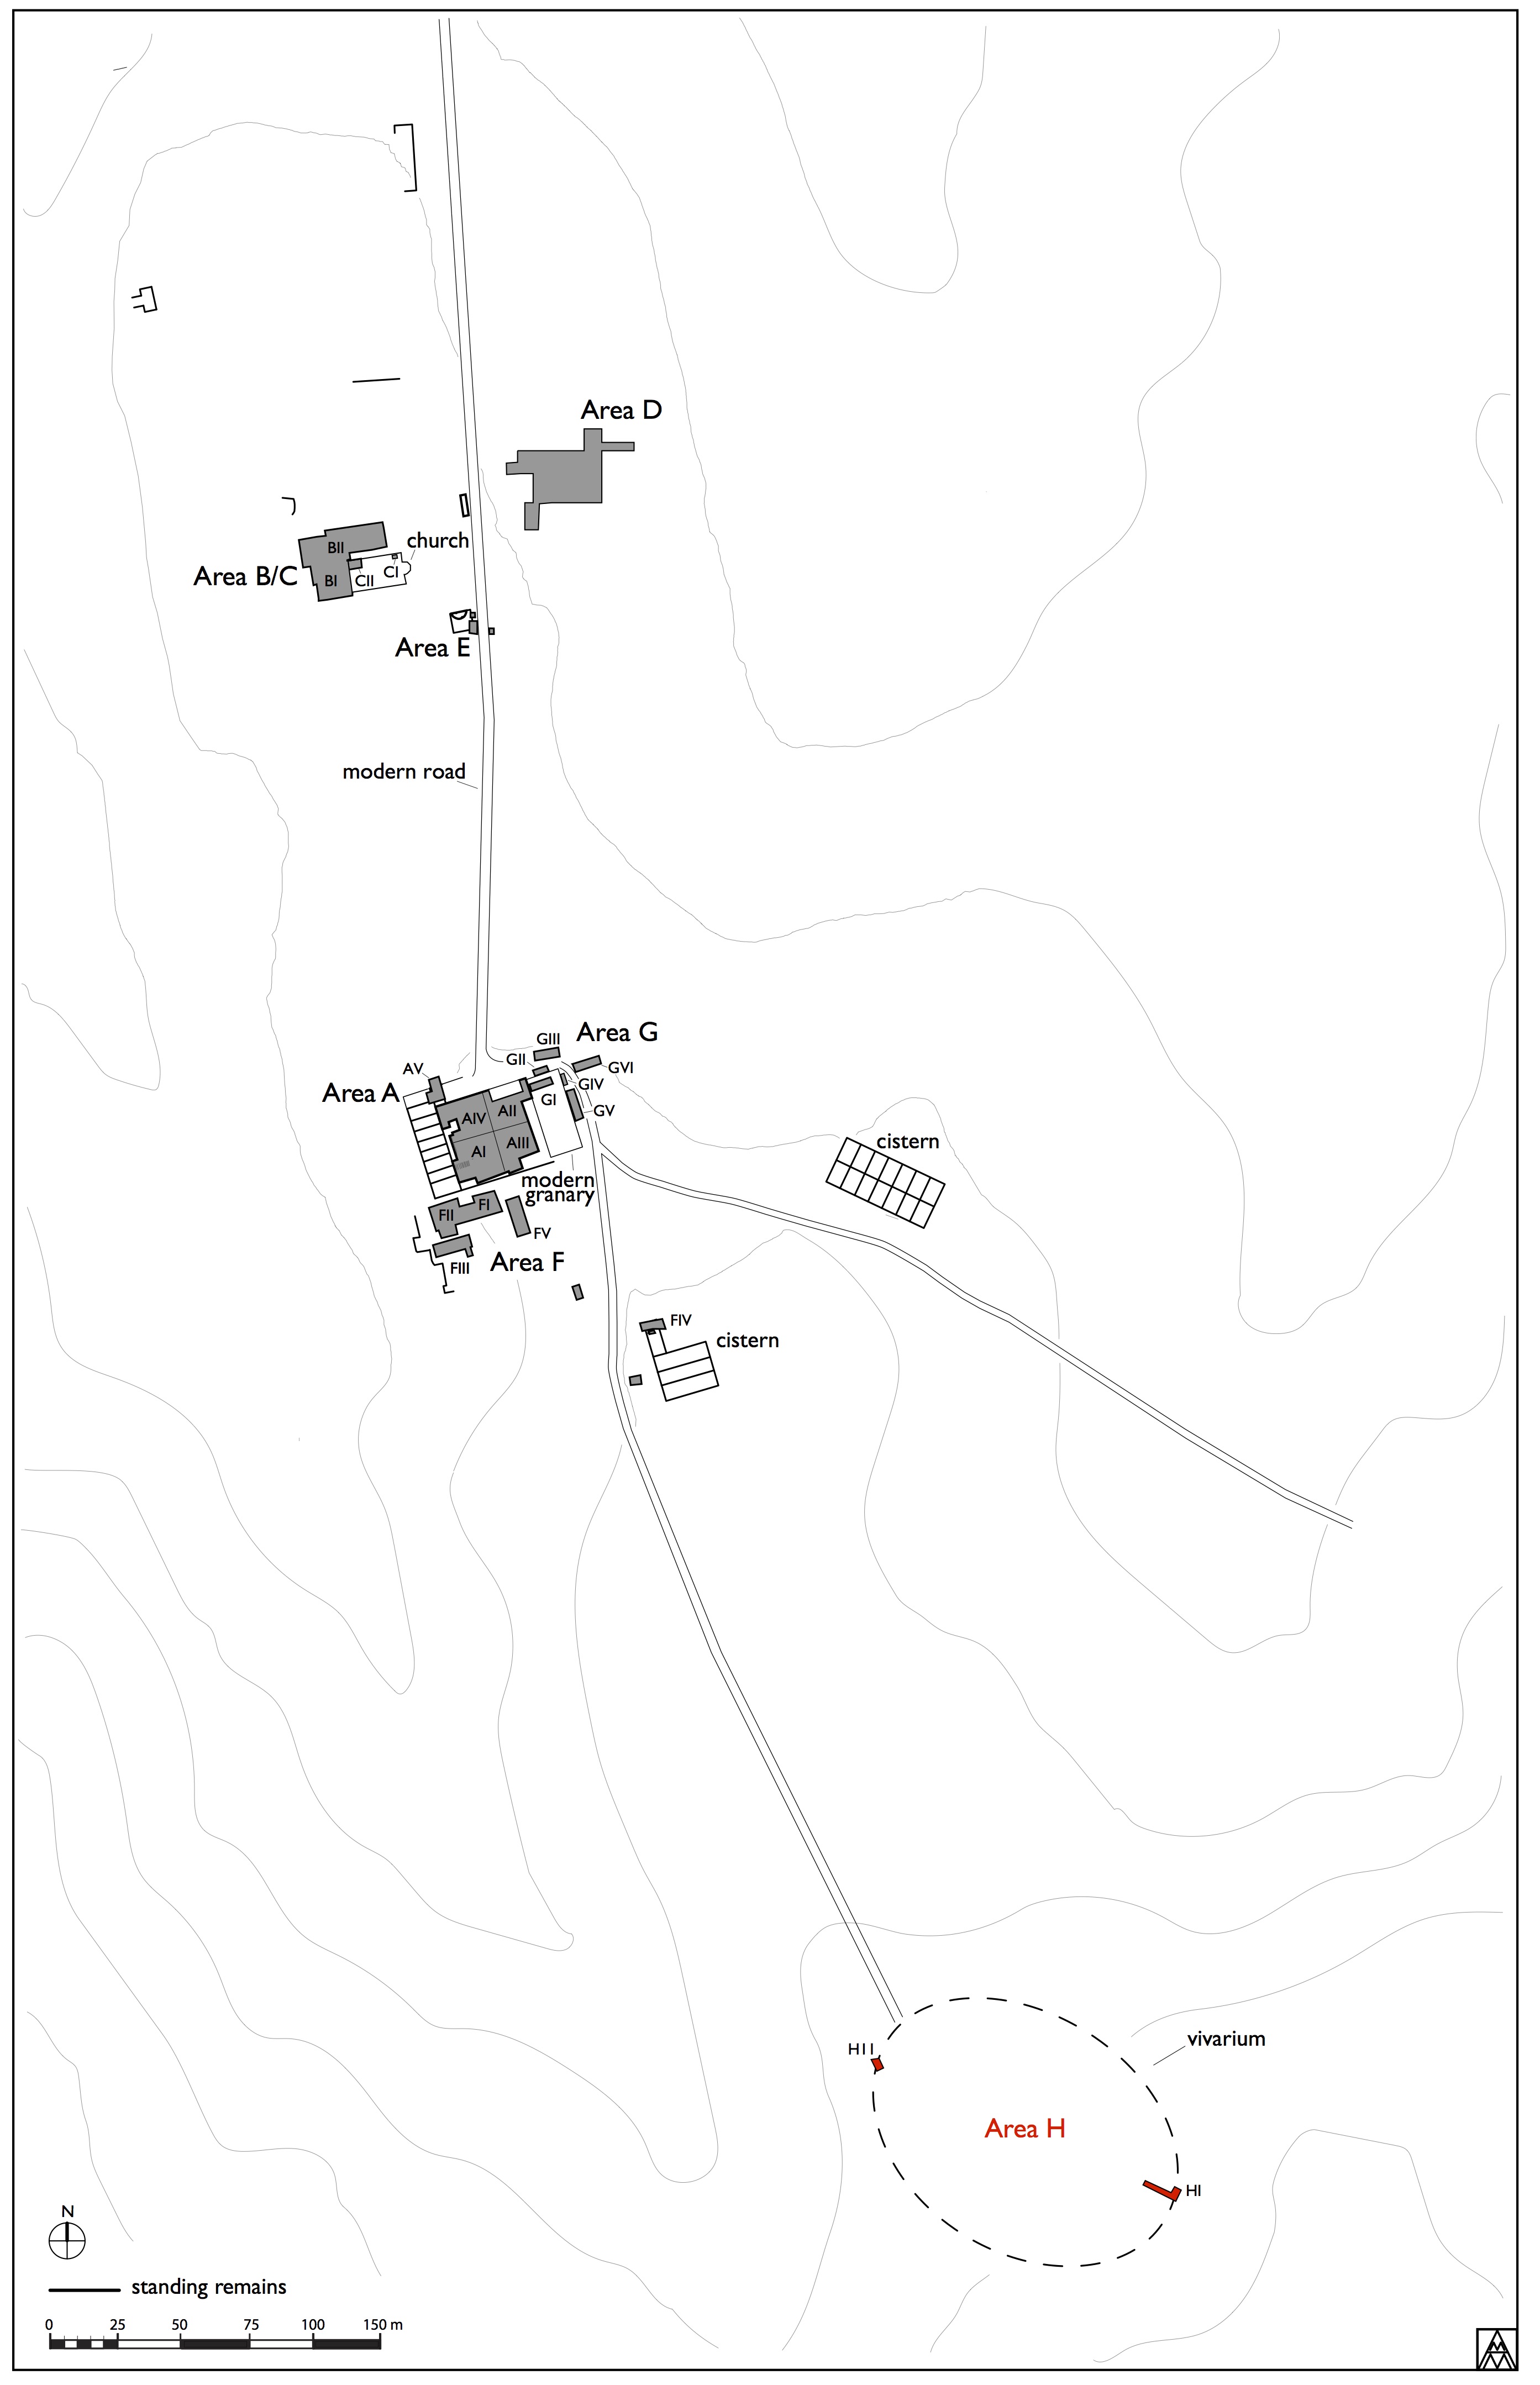 Figure 2. General site plan showing location of Area H (Margaret Andrews).